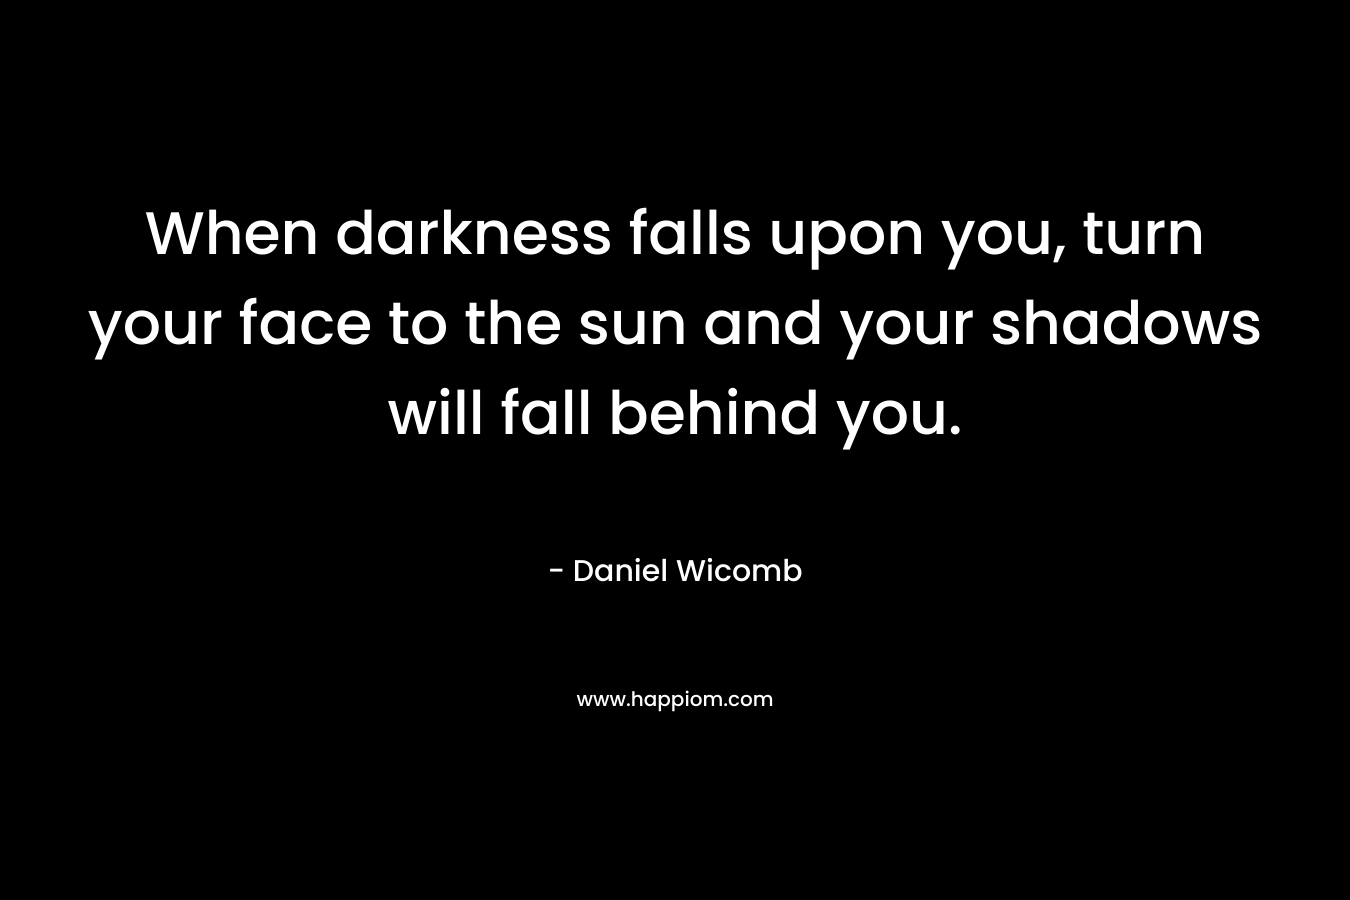 When darkness falls upon you, turn your face to the sun and your shadows will fall behind you. – Daniel Wicomb